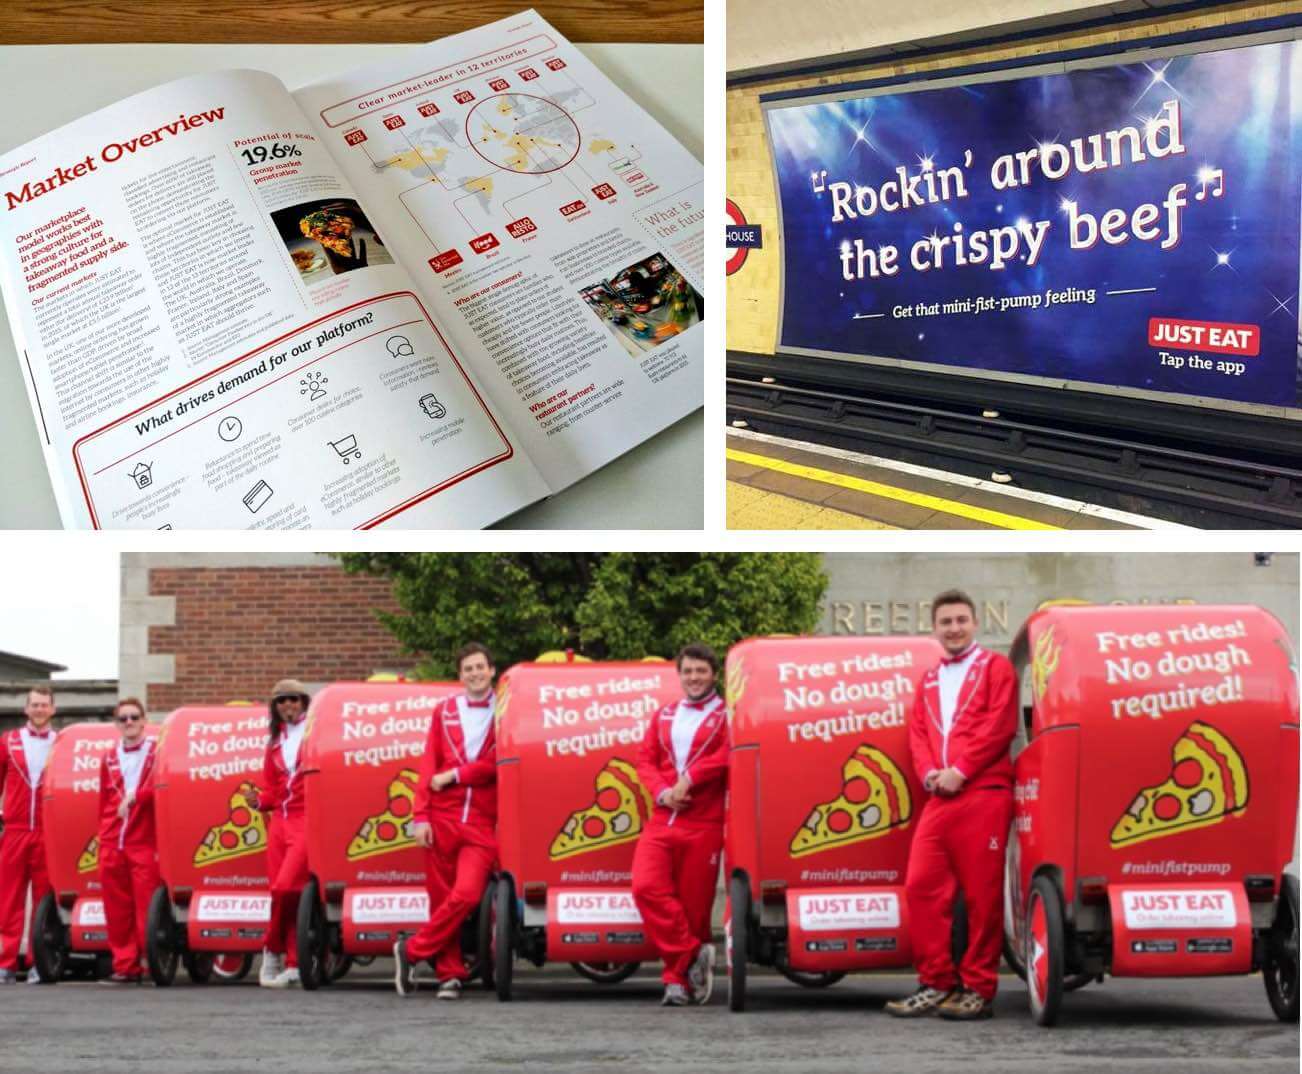 Just Eat using Aleo on books, billboards and vehicles